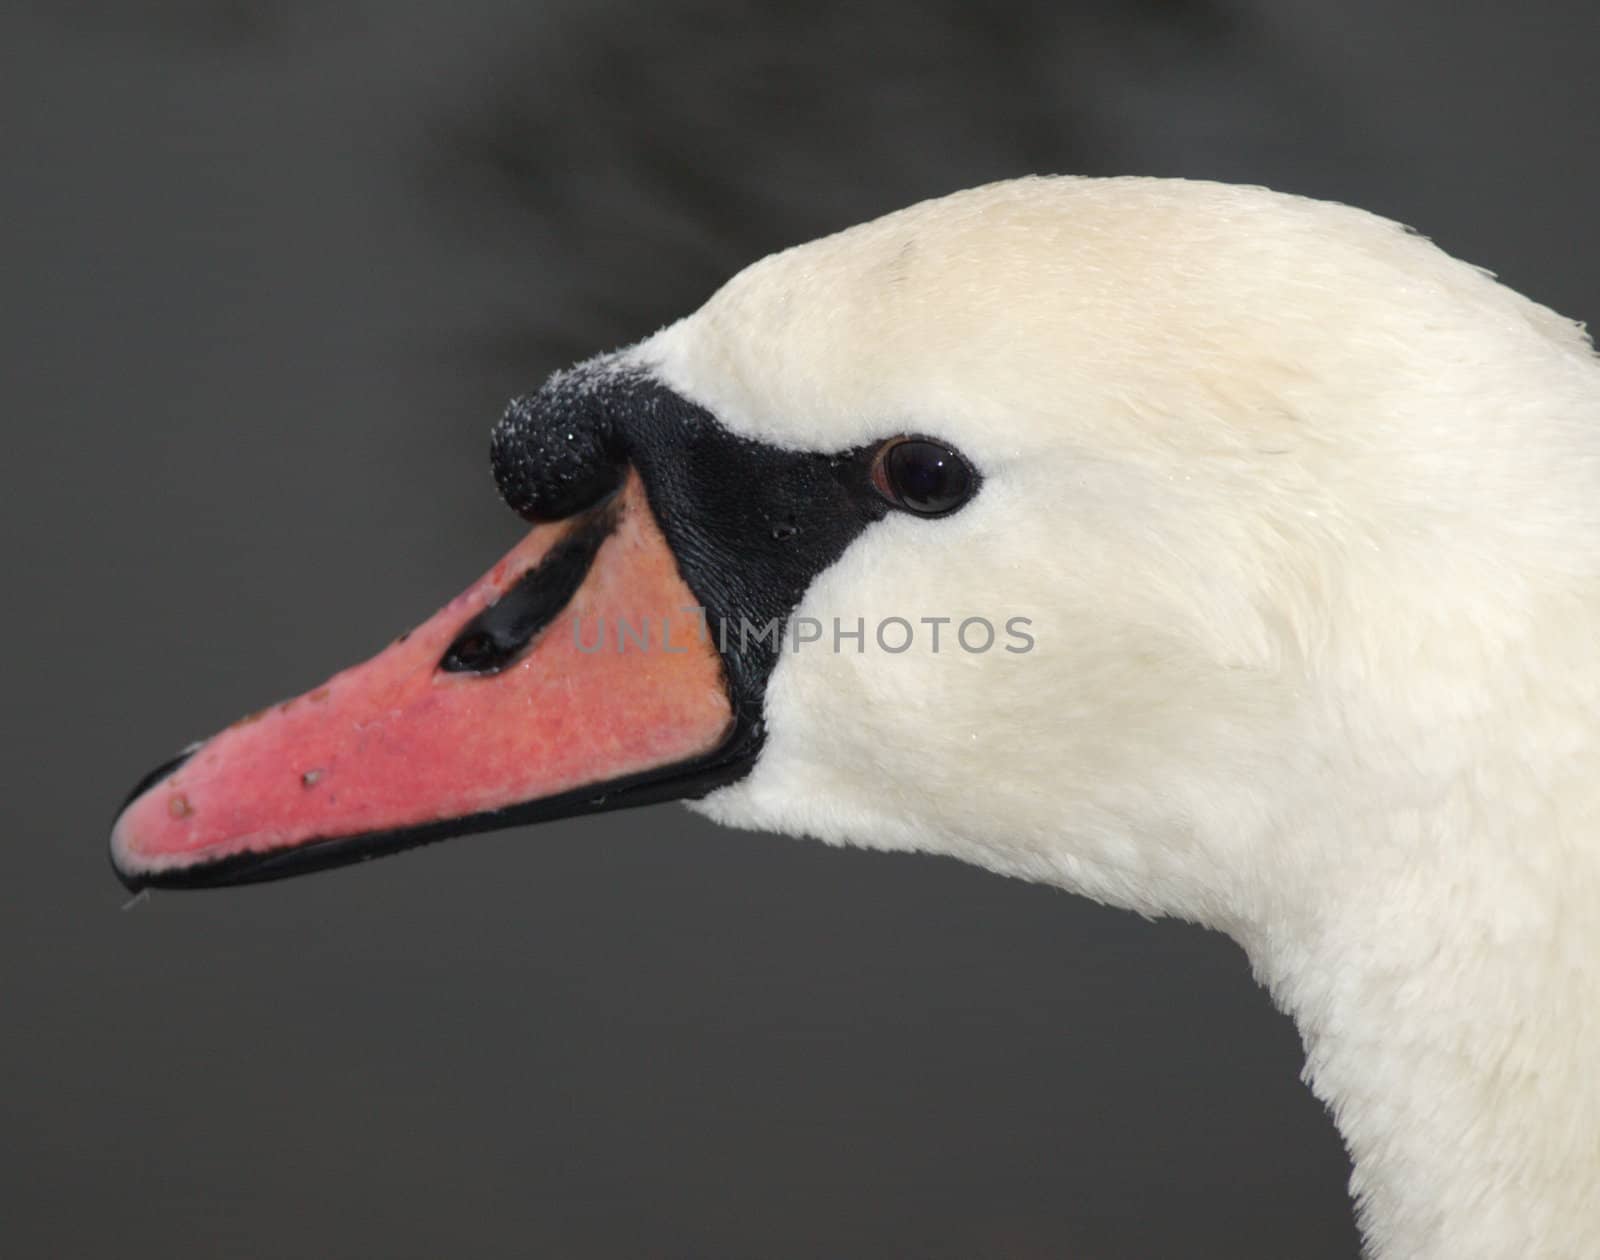 the side face of swan
